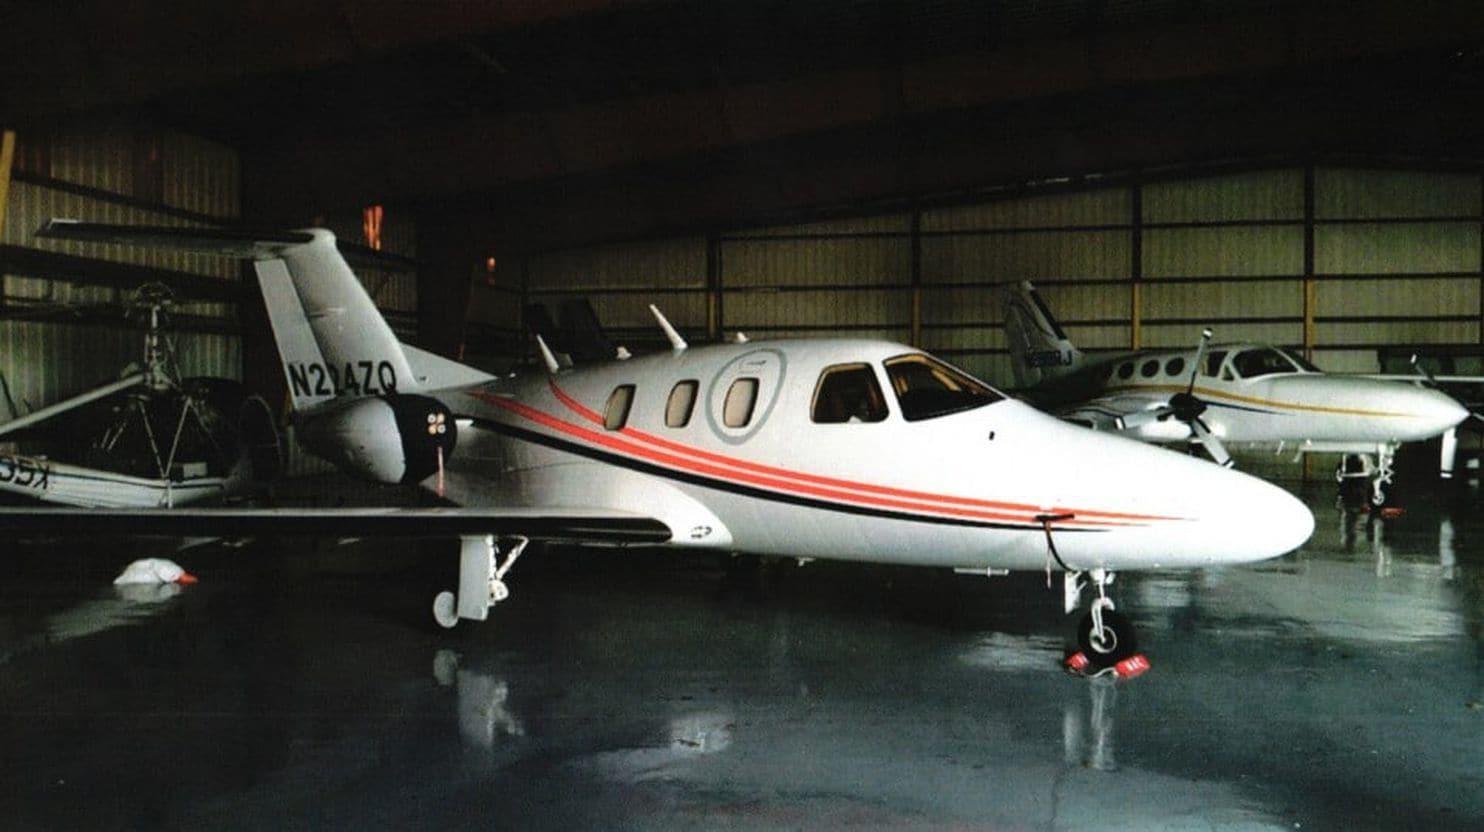 Jorge Zamora-Quezada's personal business jet has been seized by investigators